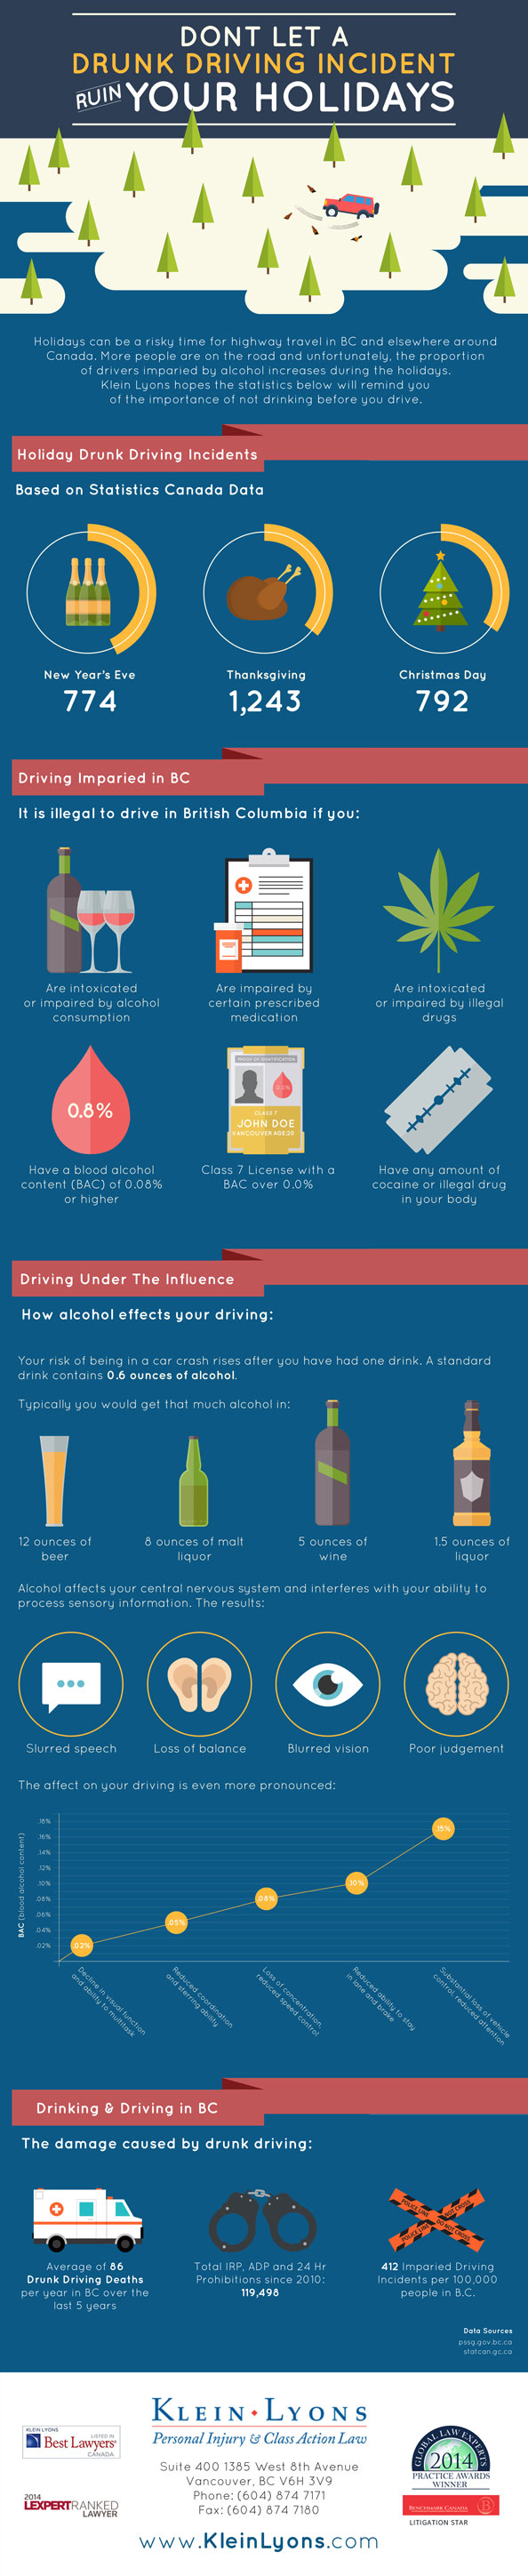 Don't-Let-A-Drunk-Driving-Accident-Ruin-Your-Holidays